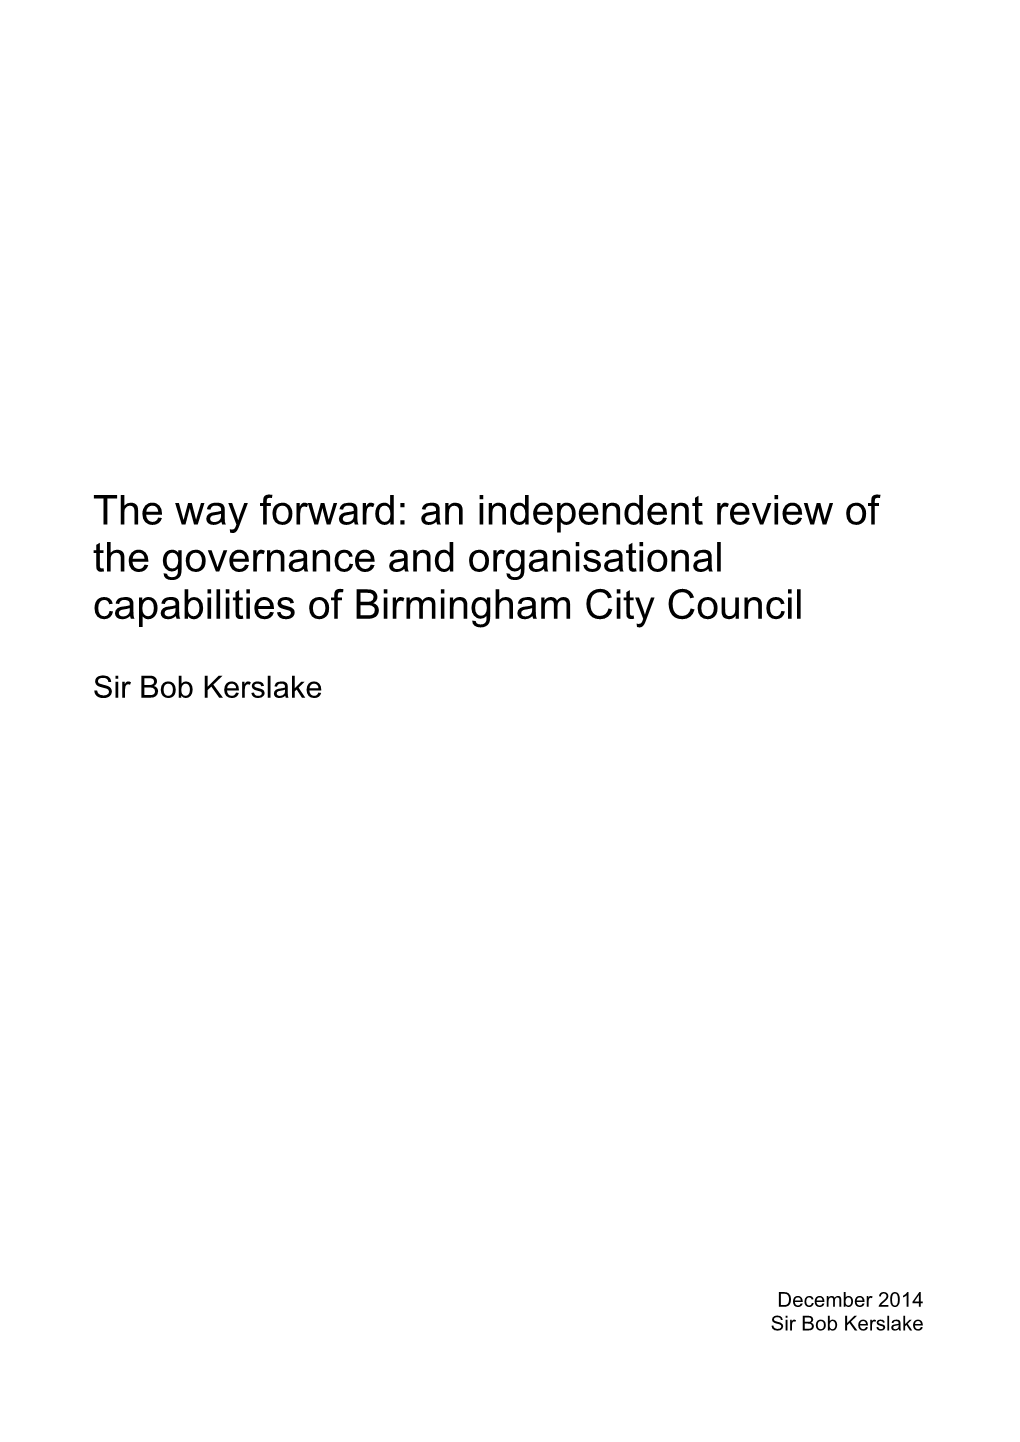 The Way Forward: an Independent Review of the Governance and Organisational Capabilities of Birmingham City Council